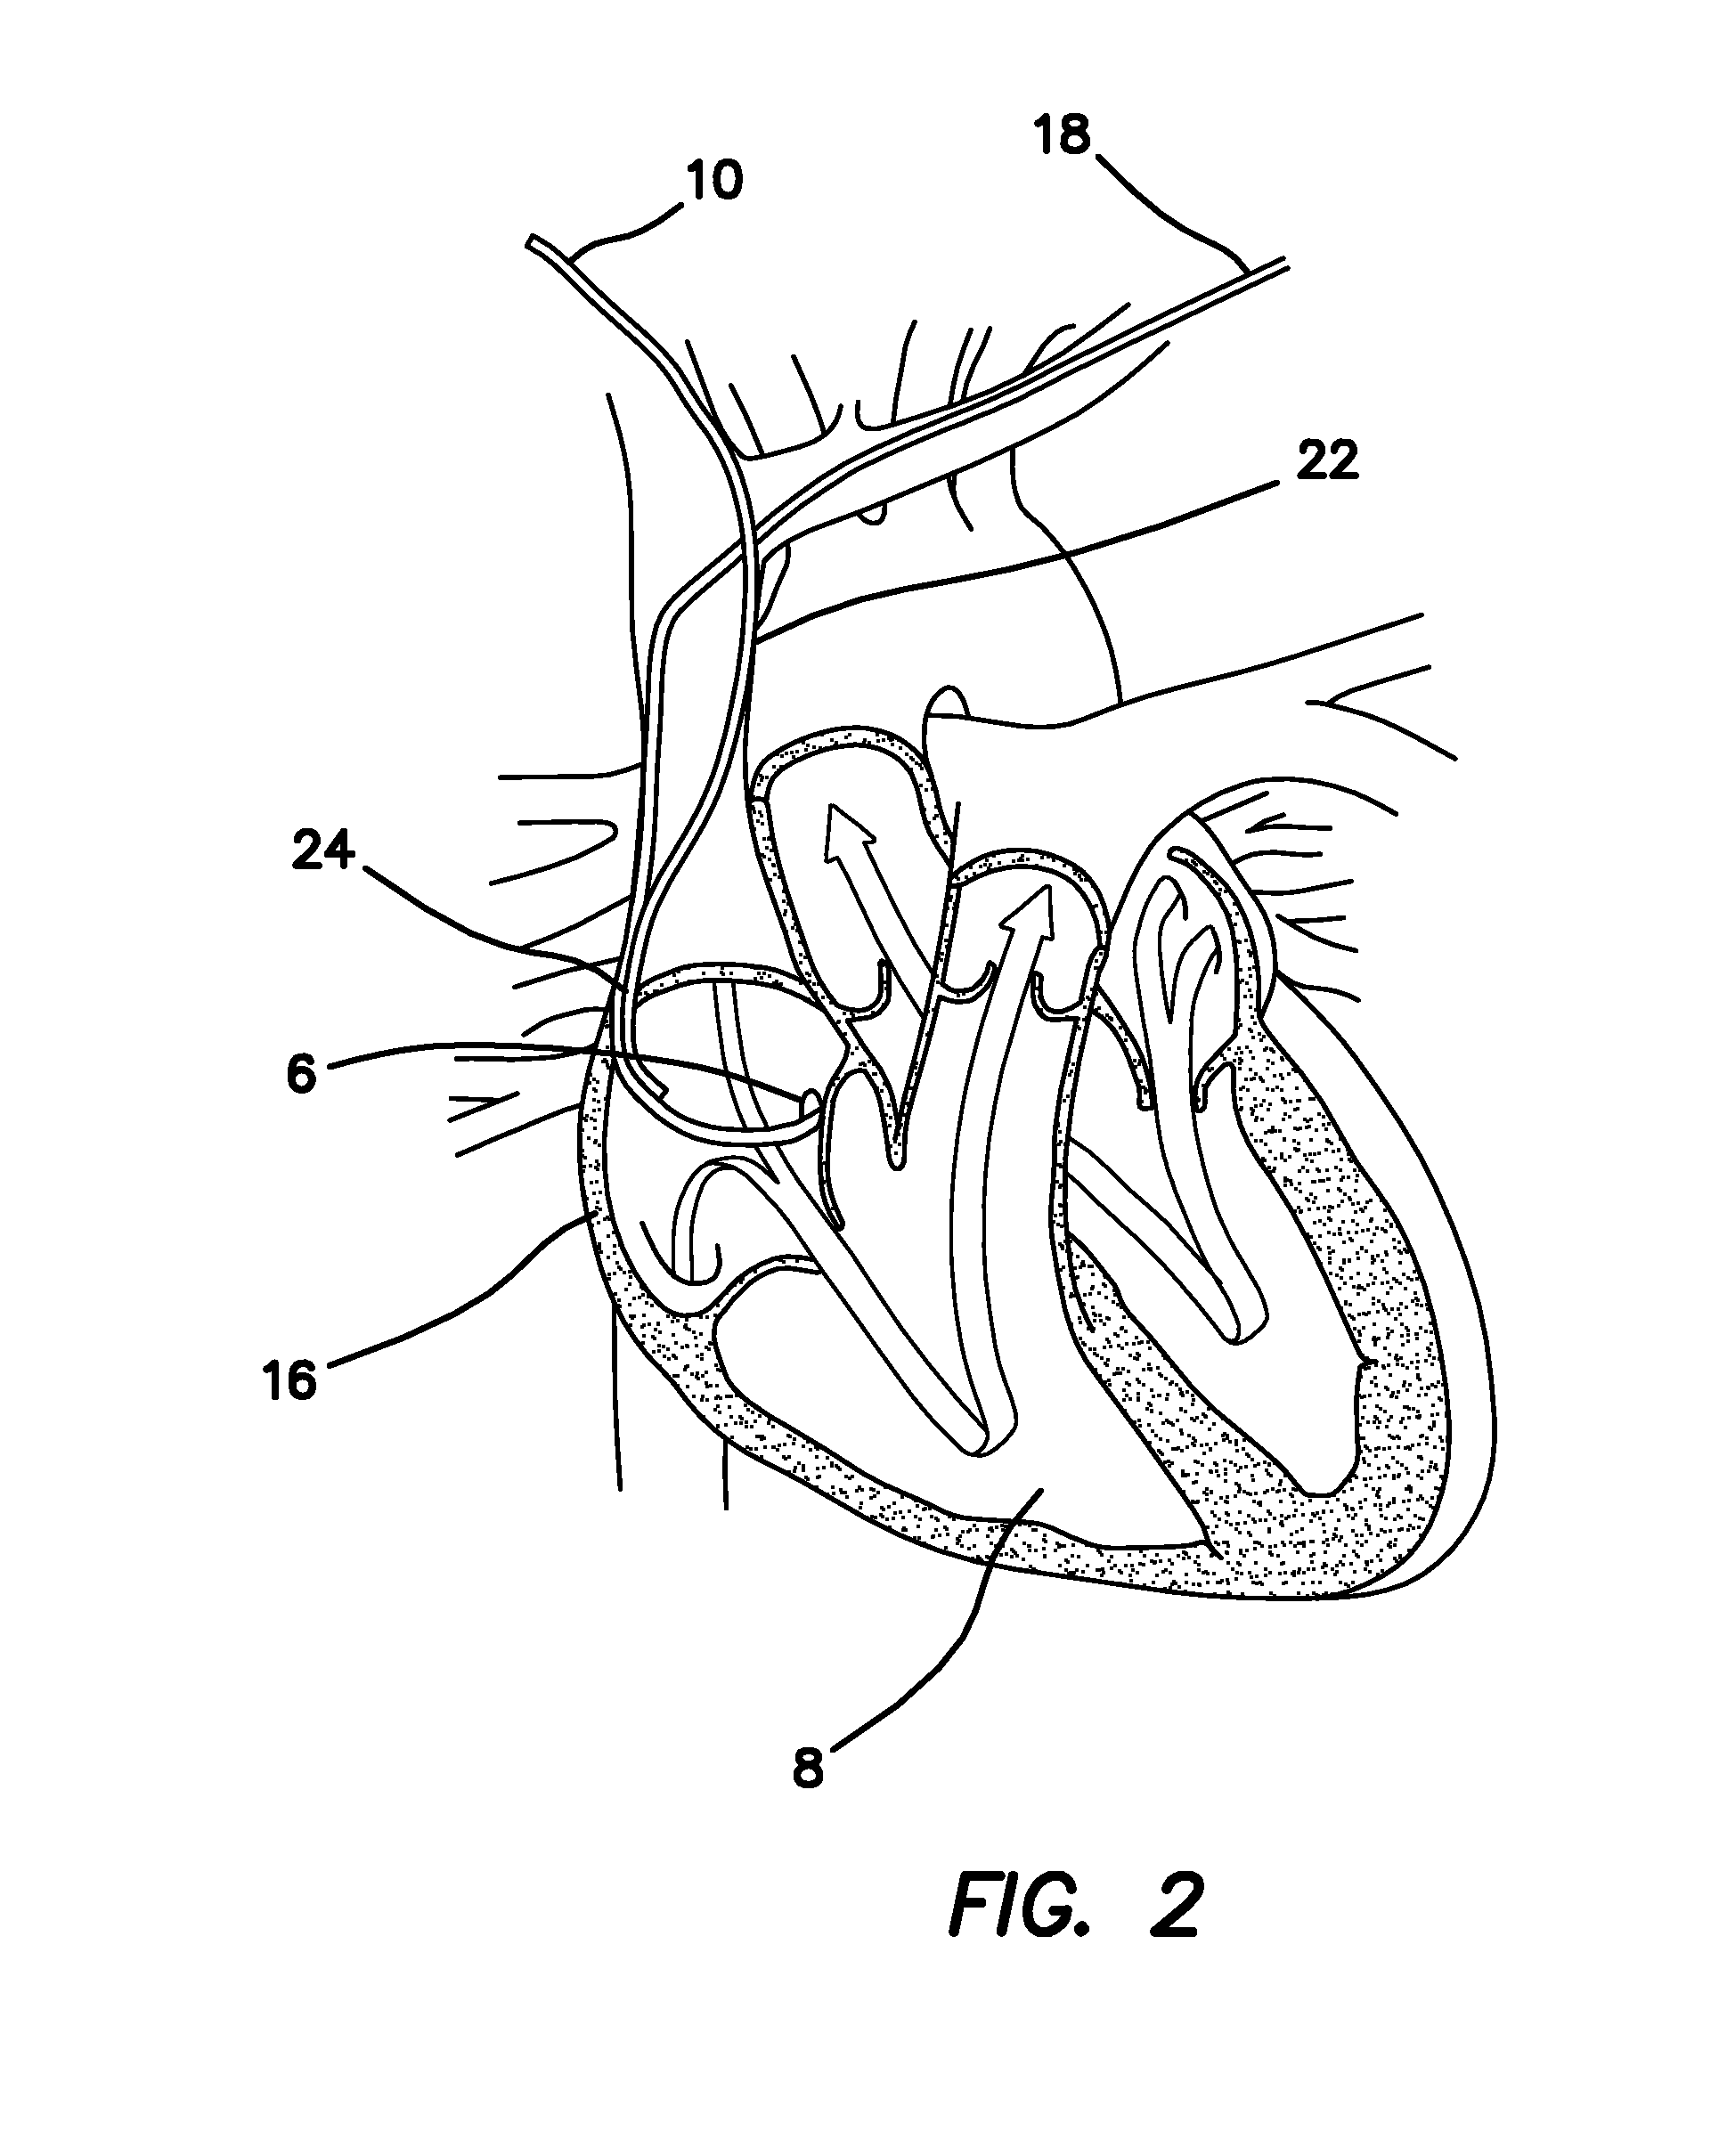 Method and Apparatus for a Right-Sided Short Sheath